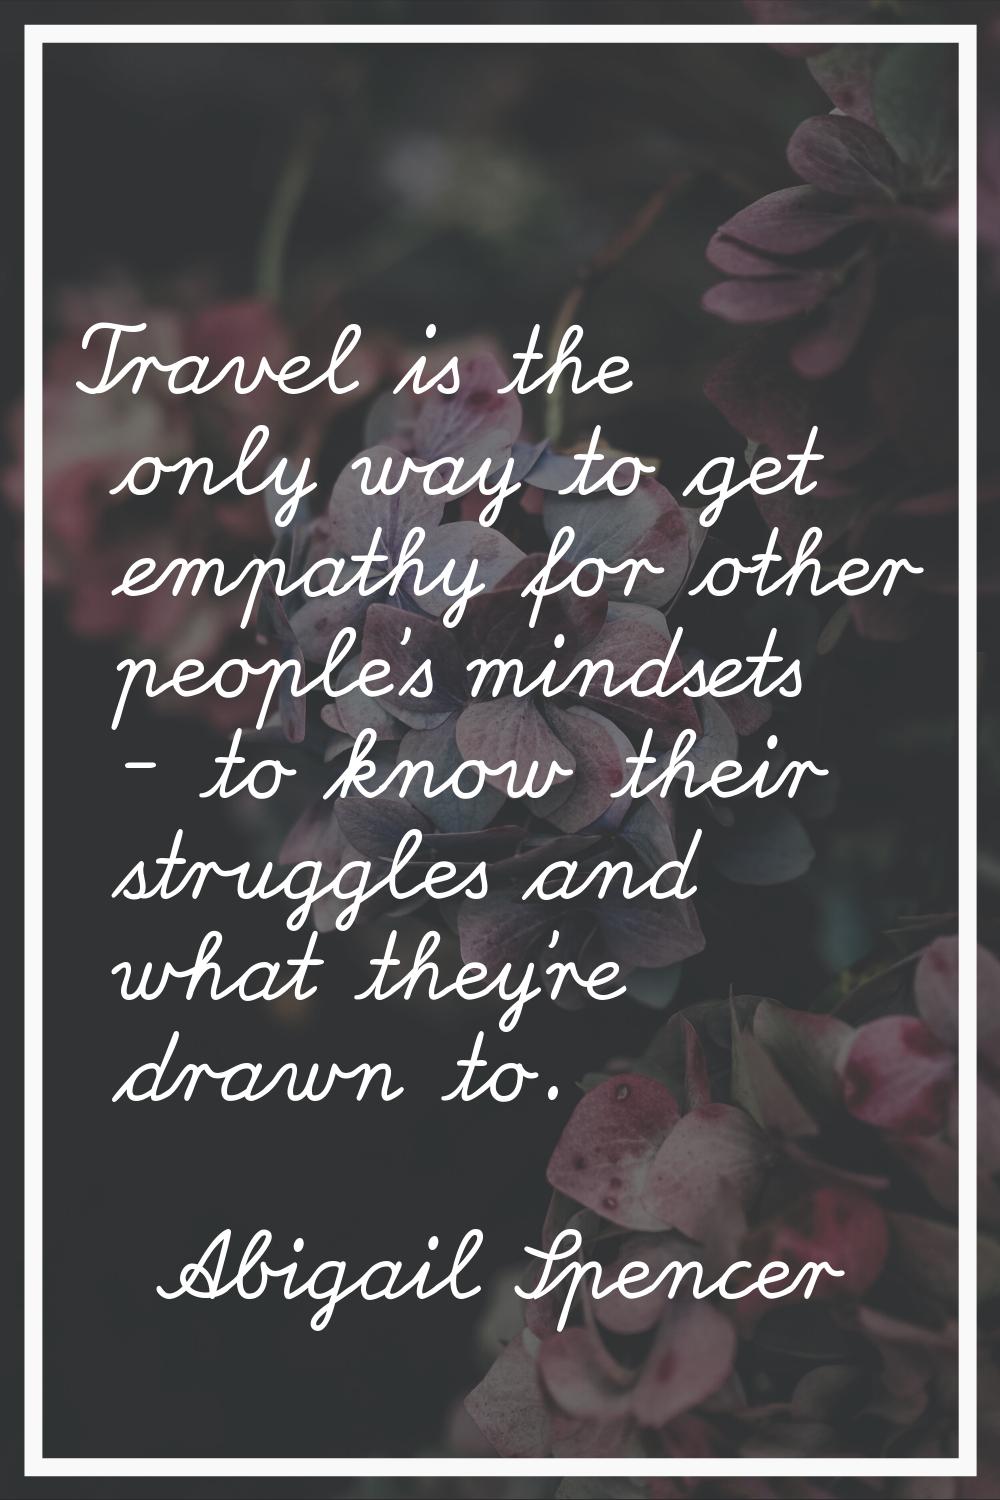 Travel is the only way to get empathy for other people's mindsets - to know their struggles and wha